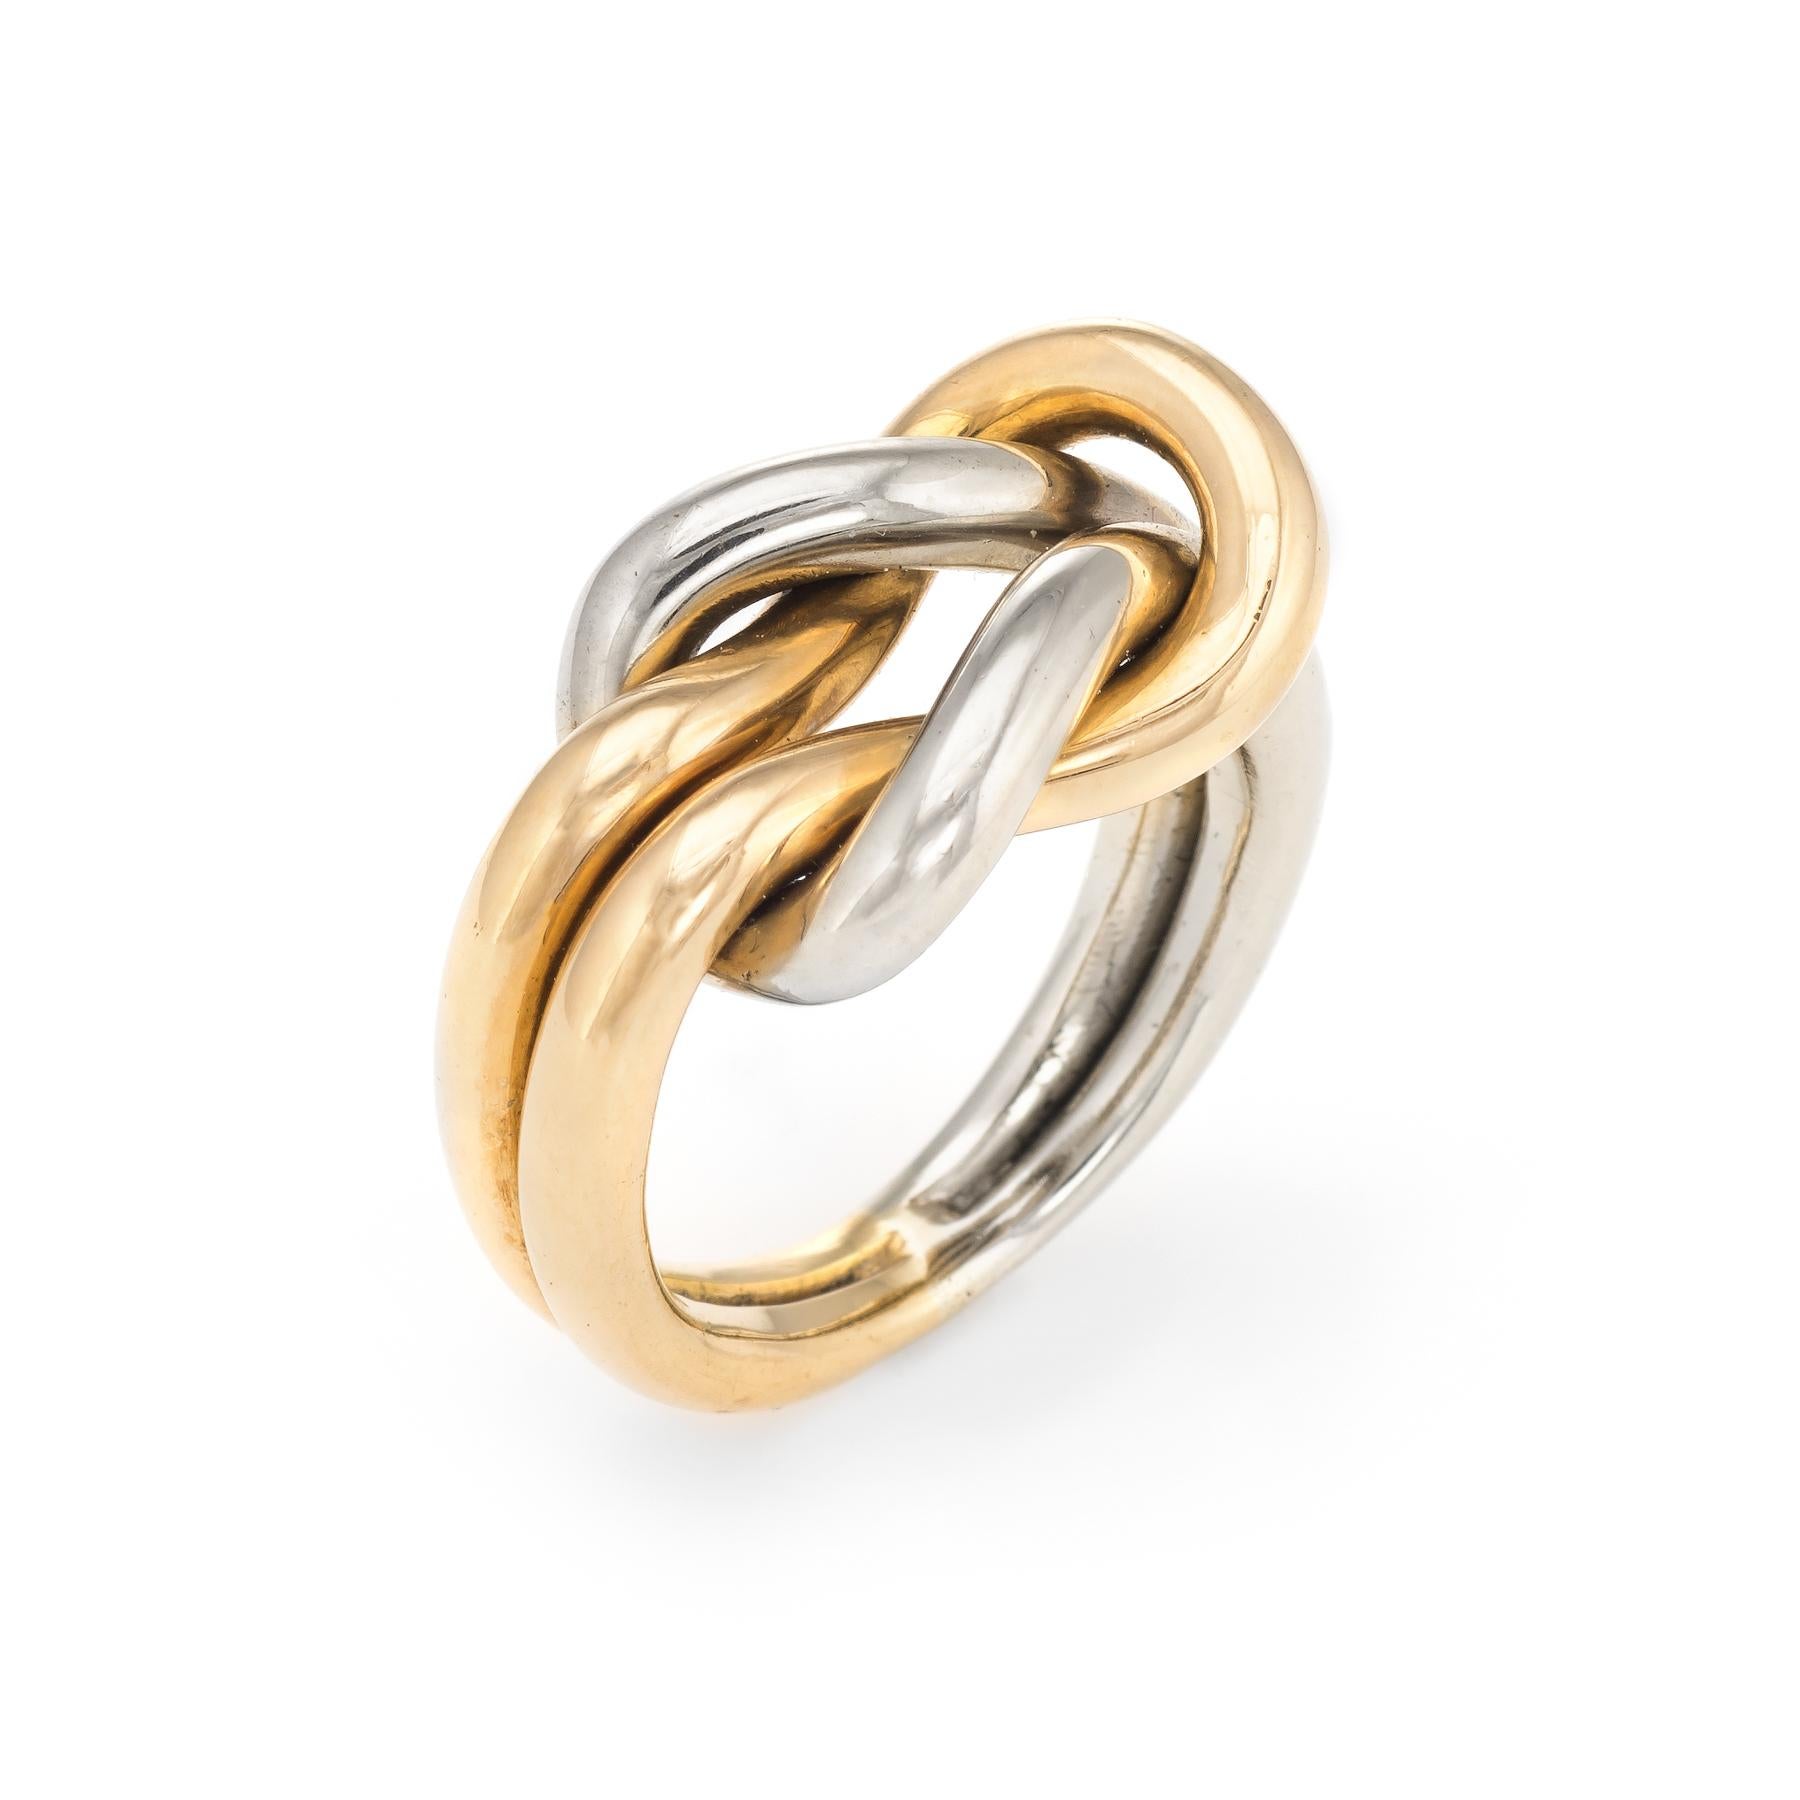 Vintage Cartier Hercules knot ring, crafted in 18 karat yellow & white gold.  

The ring is no longer available for sale at retail.

The ring is in excellent condition. 

Particulars:
Weight: 13.5 grams

Stones:  N/A

Size & Measurements: The ring